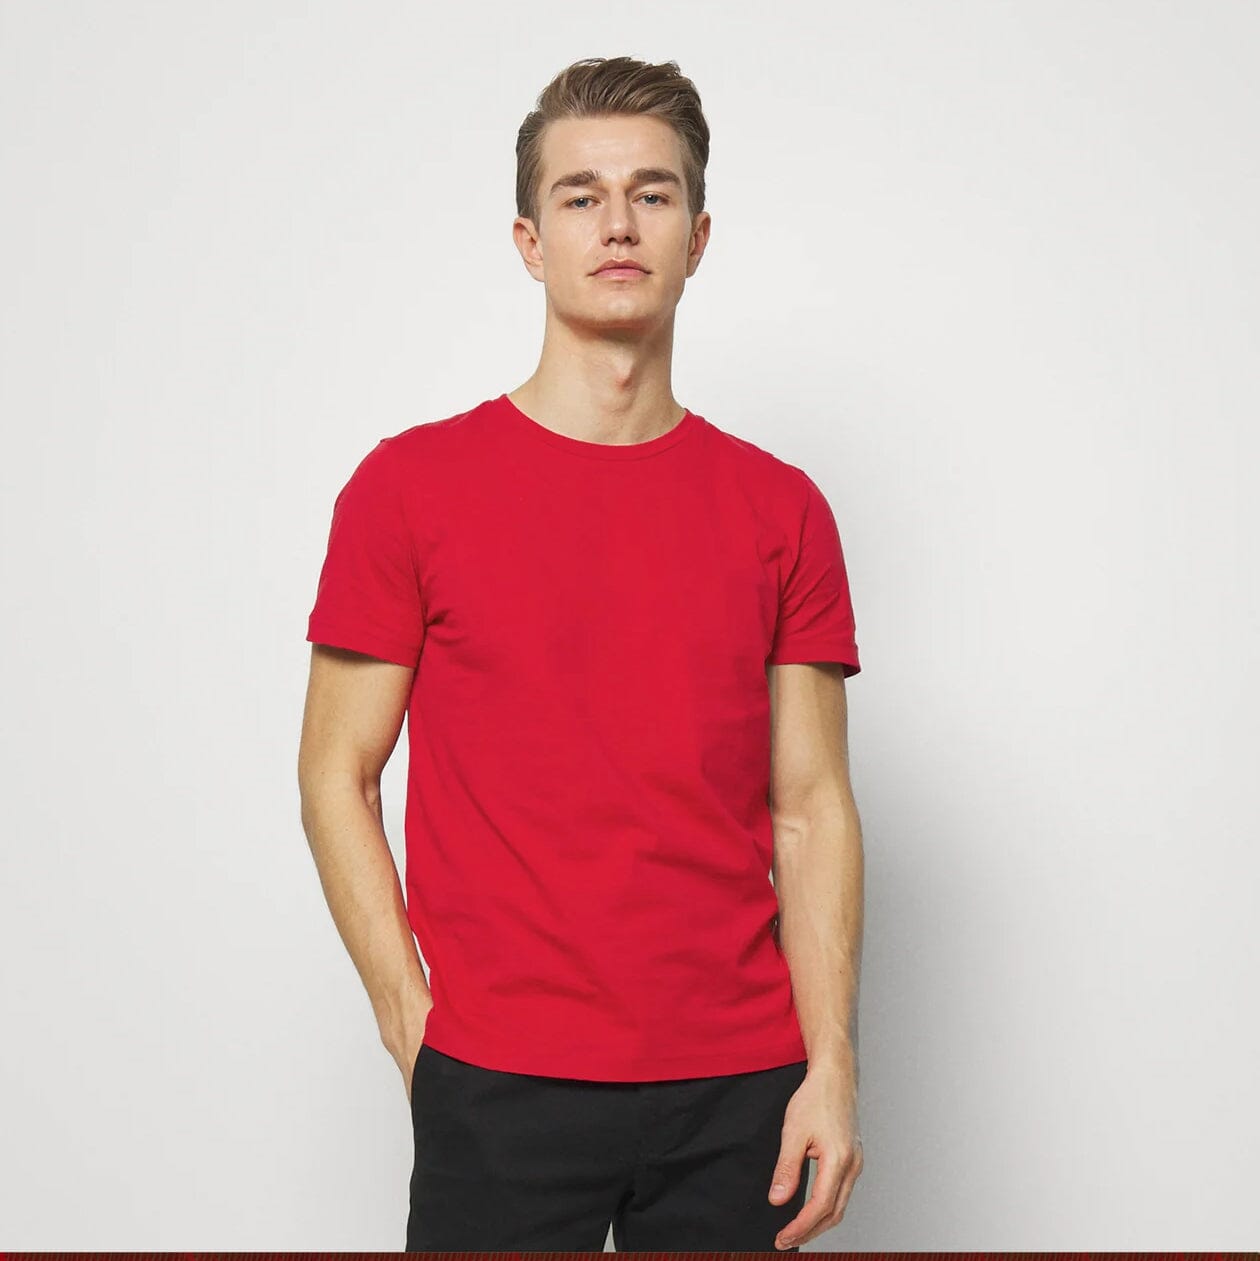 Lower East Men's Short-Sleeve Tee - 100% BCI Combed Cotton Perfection Men's Tee Shirt Image Red S 